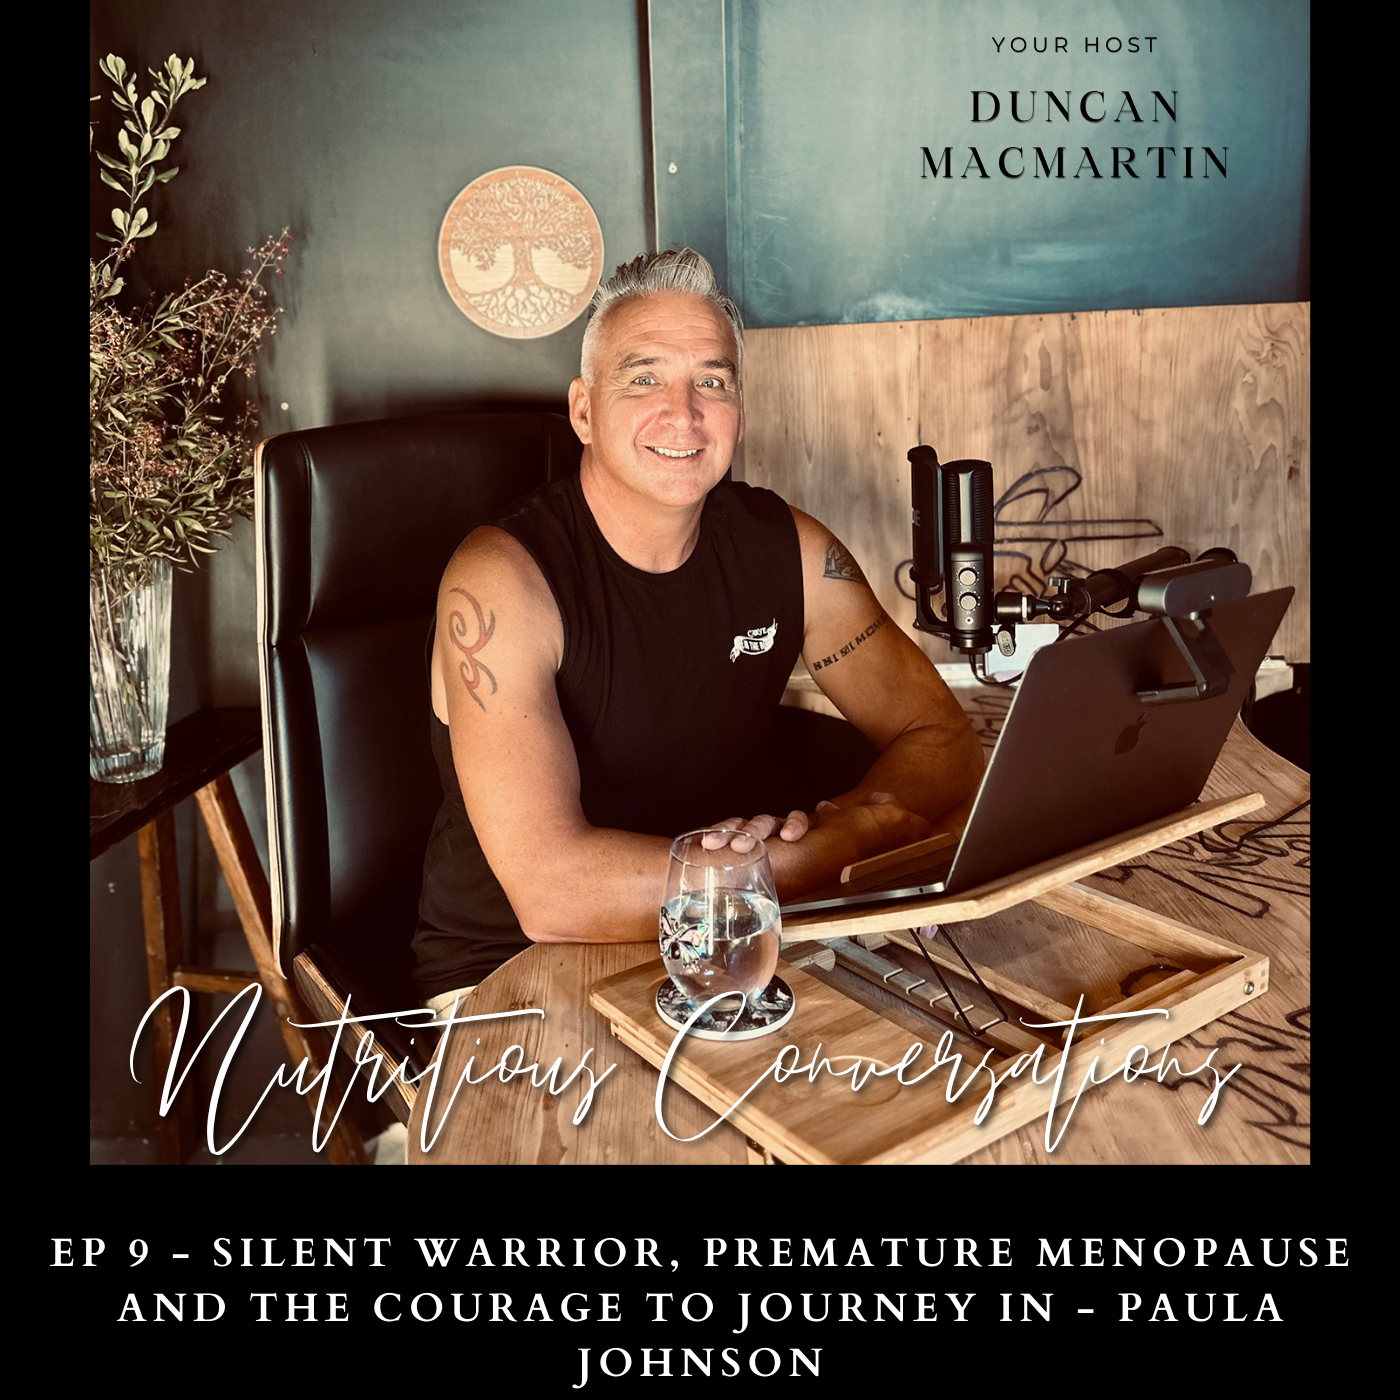 Silent Warrior, Premature Menopause and the courage to journey in - Paula Johnson